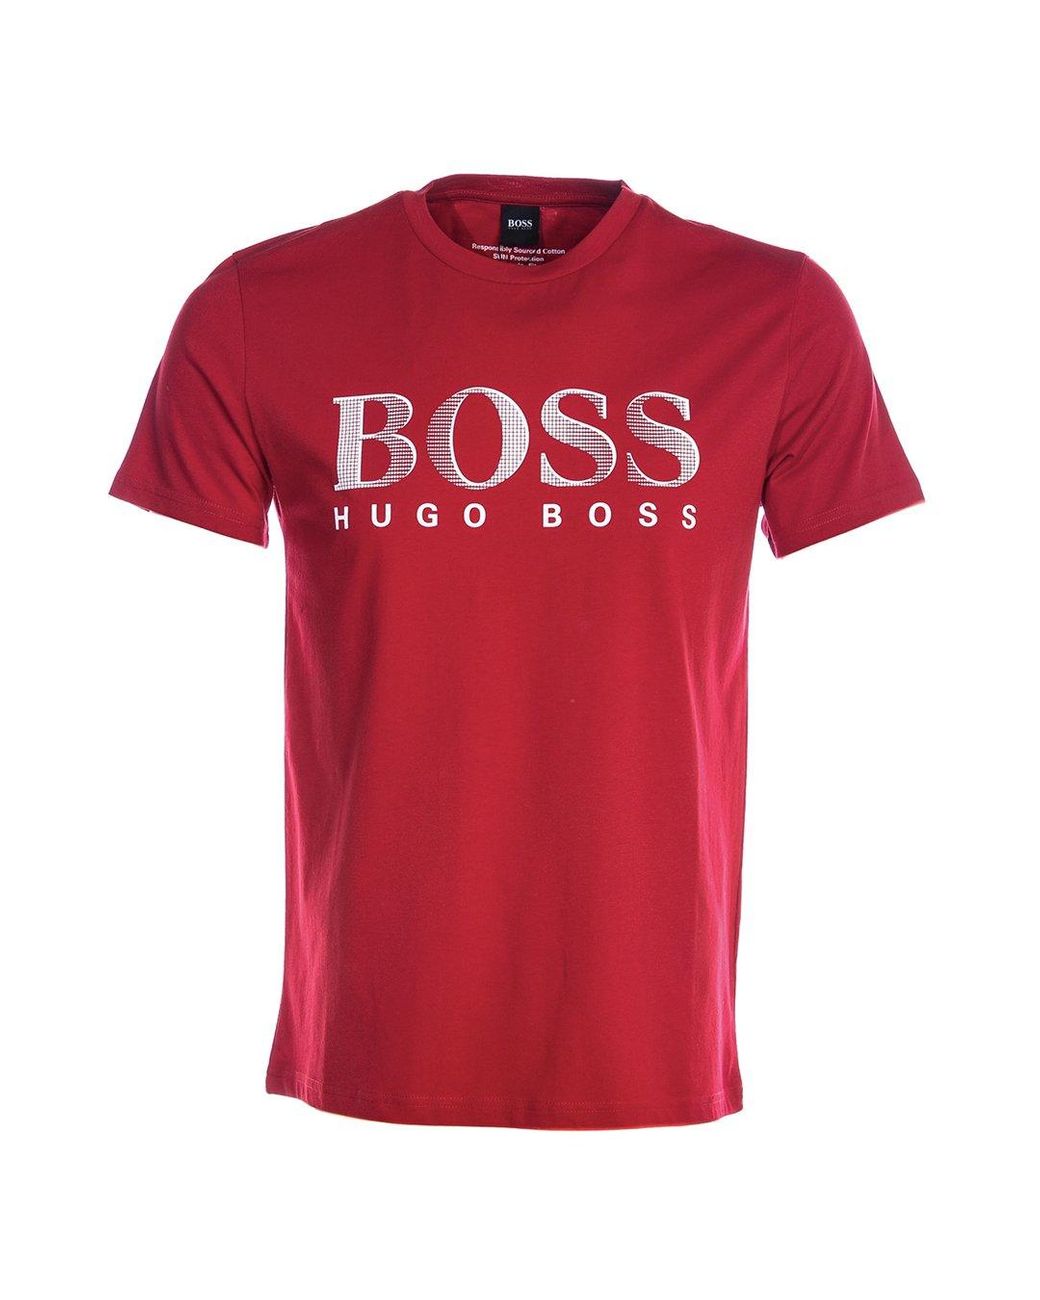 BOSS by Hugo Boss Cotton Rn T-shirt in Red for Men - Lyst